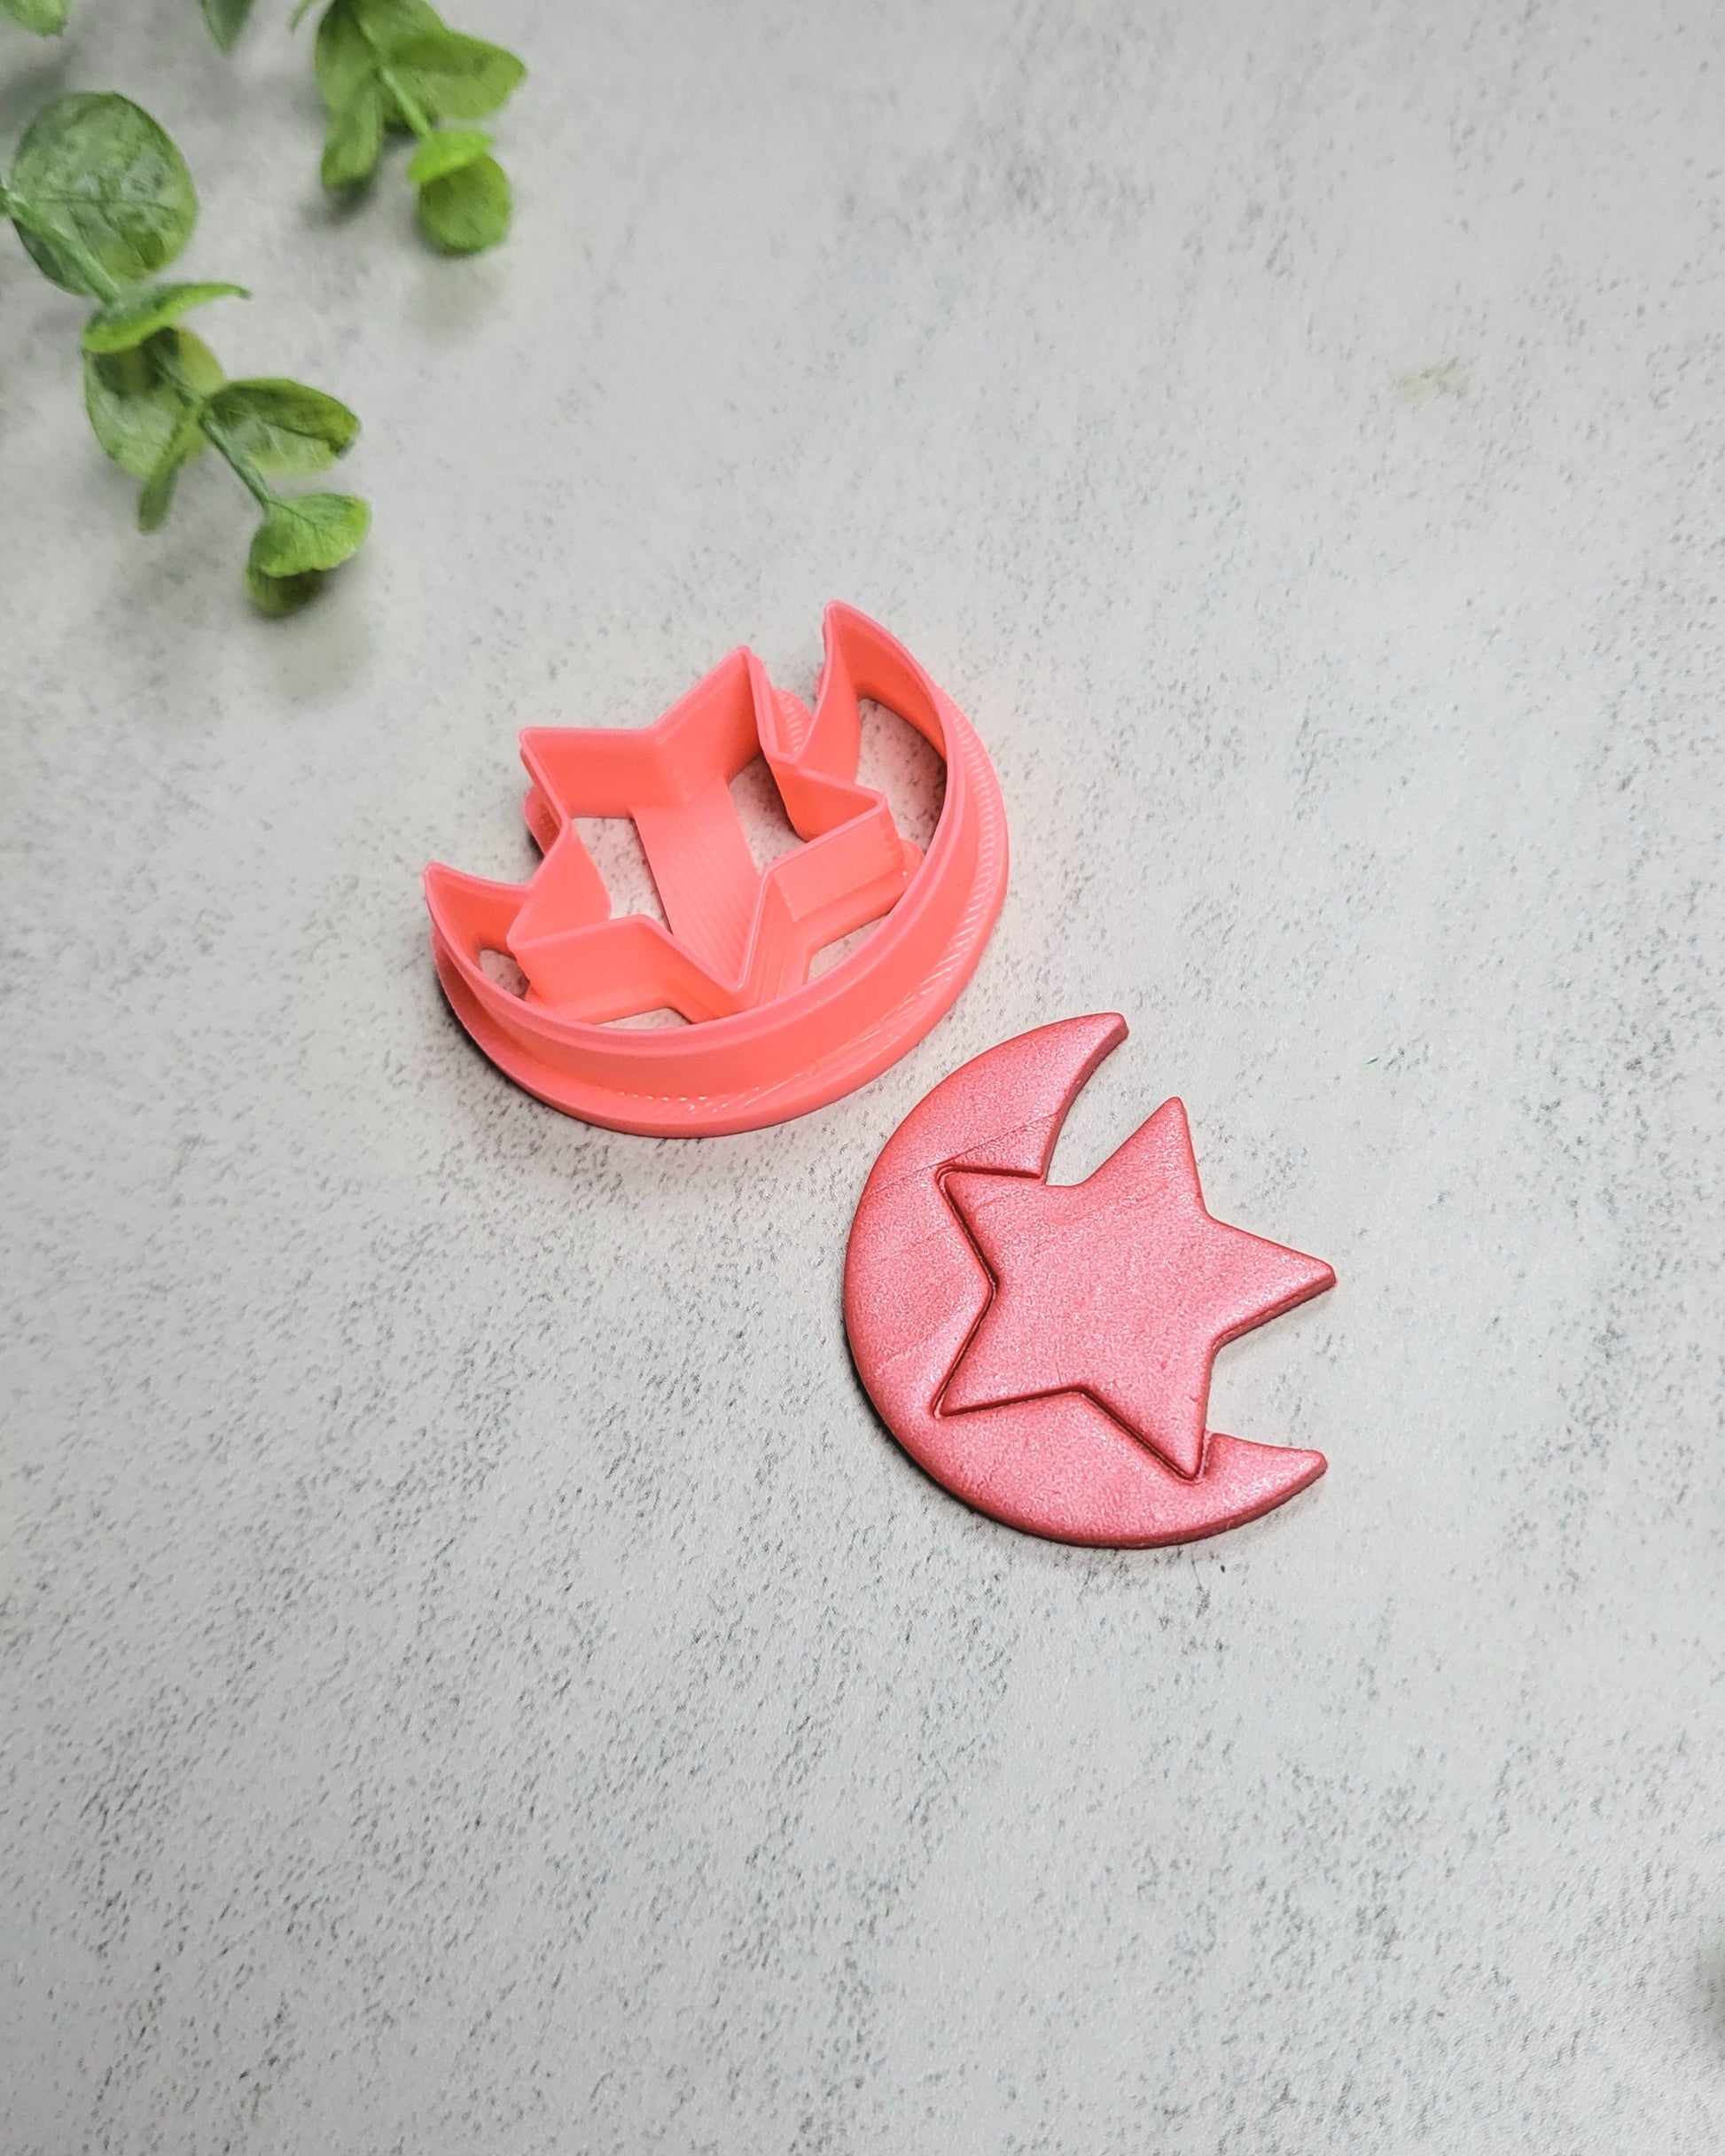 Moon and Star Polymer Clay Cutter, Moon Clay Cutter, Star Clay Cutter